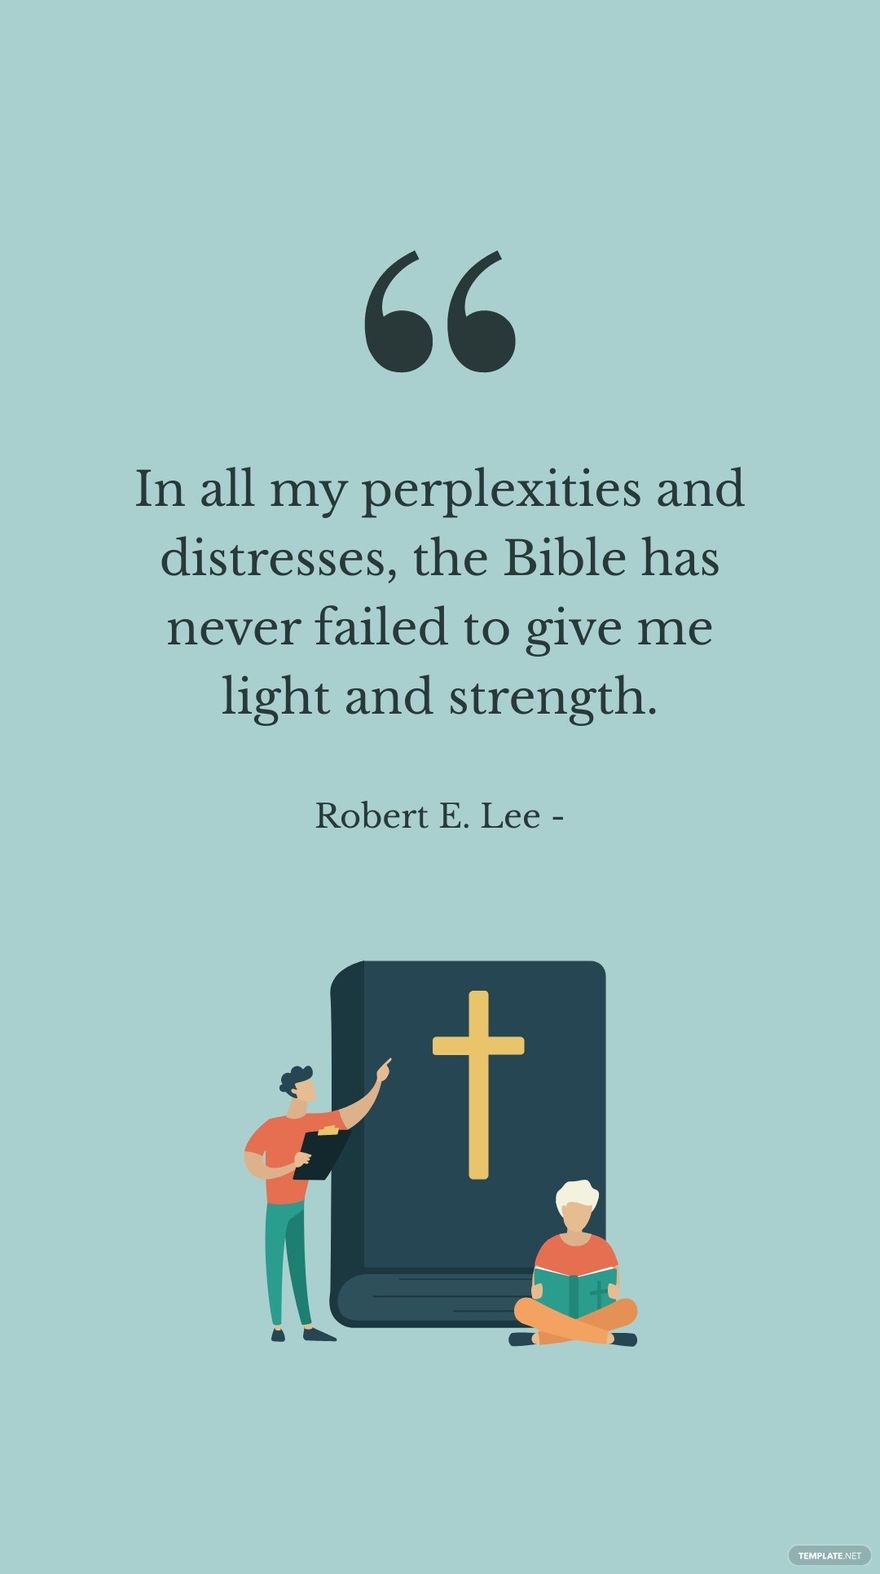 Robert E. Lee - In all my perplexities and distresses, the Bible has never failed to give me light and strength.